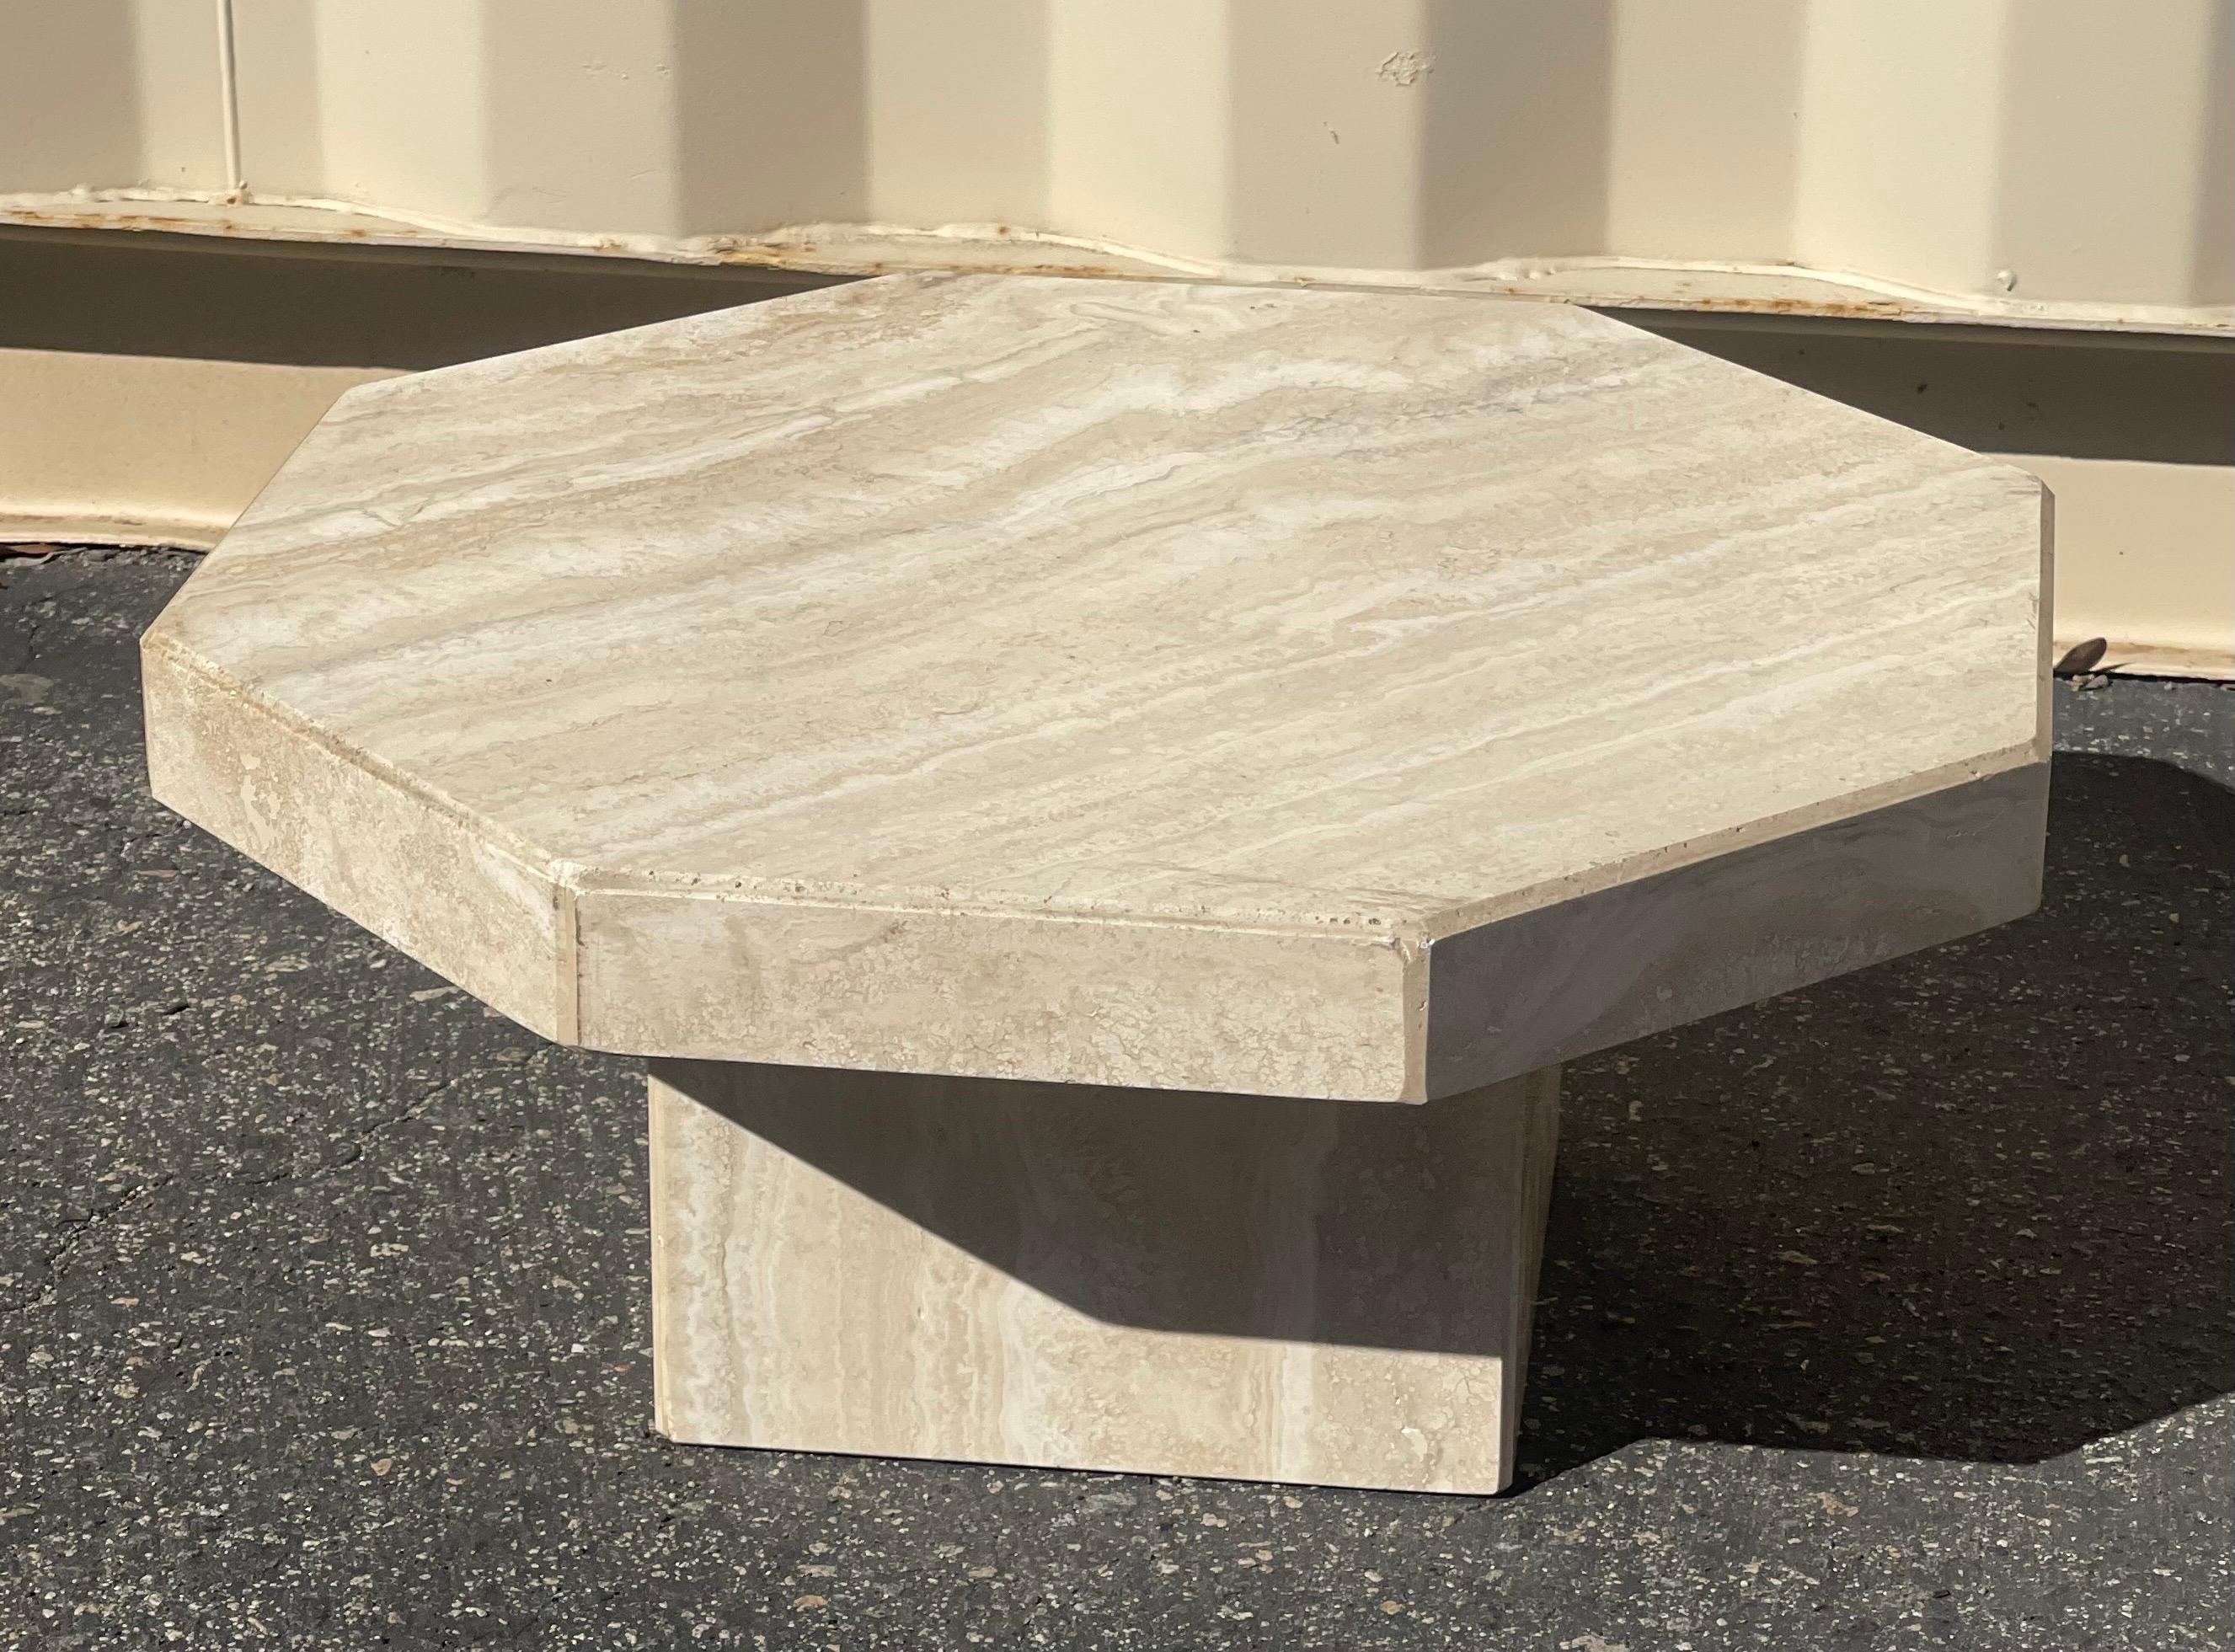 Low Profile Italian Travertine Octagonal Side Table In Good Condition For Sale In San Diego, CA